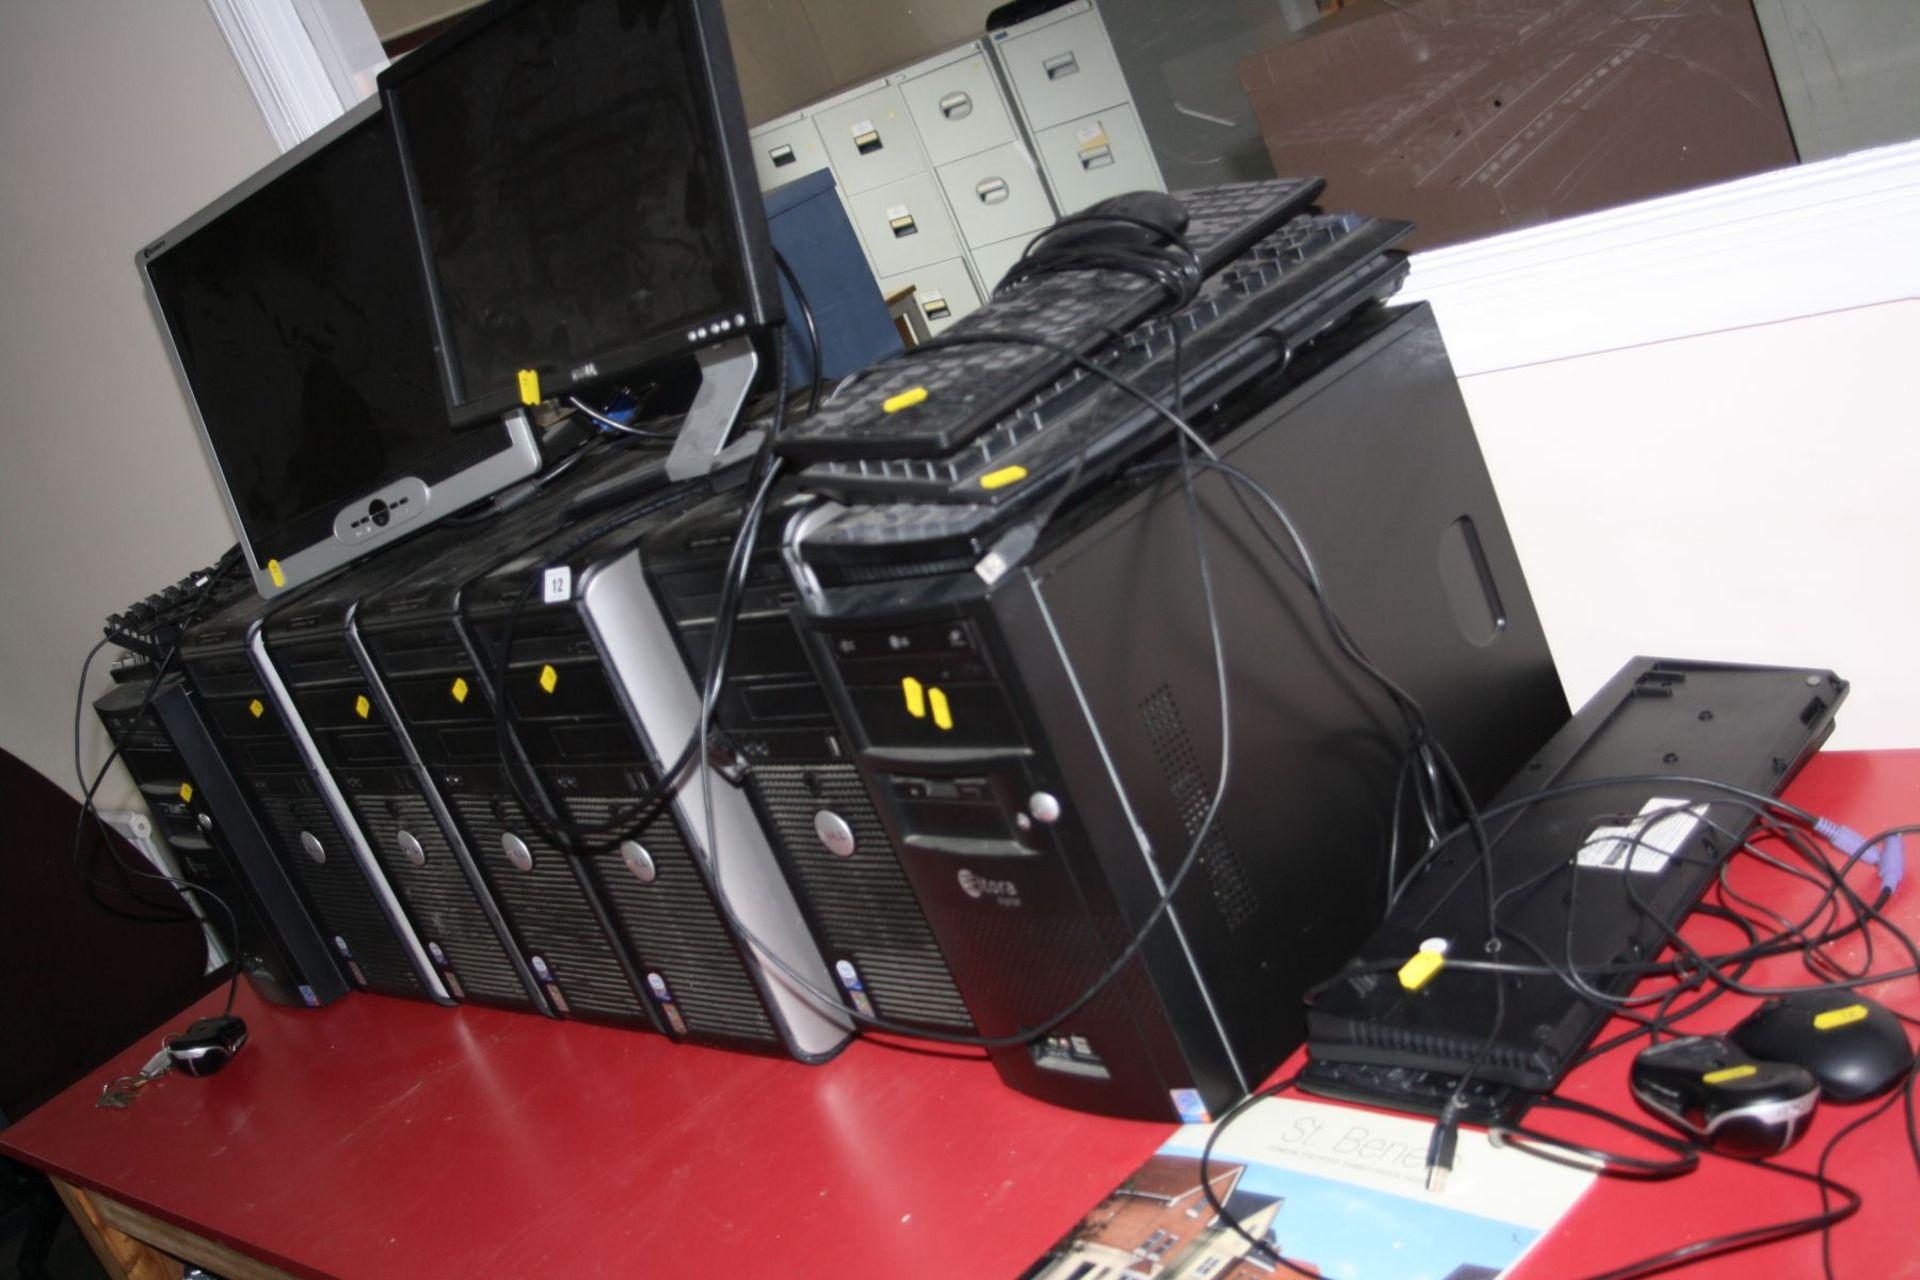 SEVEN DELL COMPUTER TOWERS, two screens, keyboards and mice